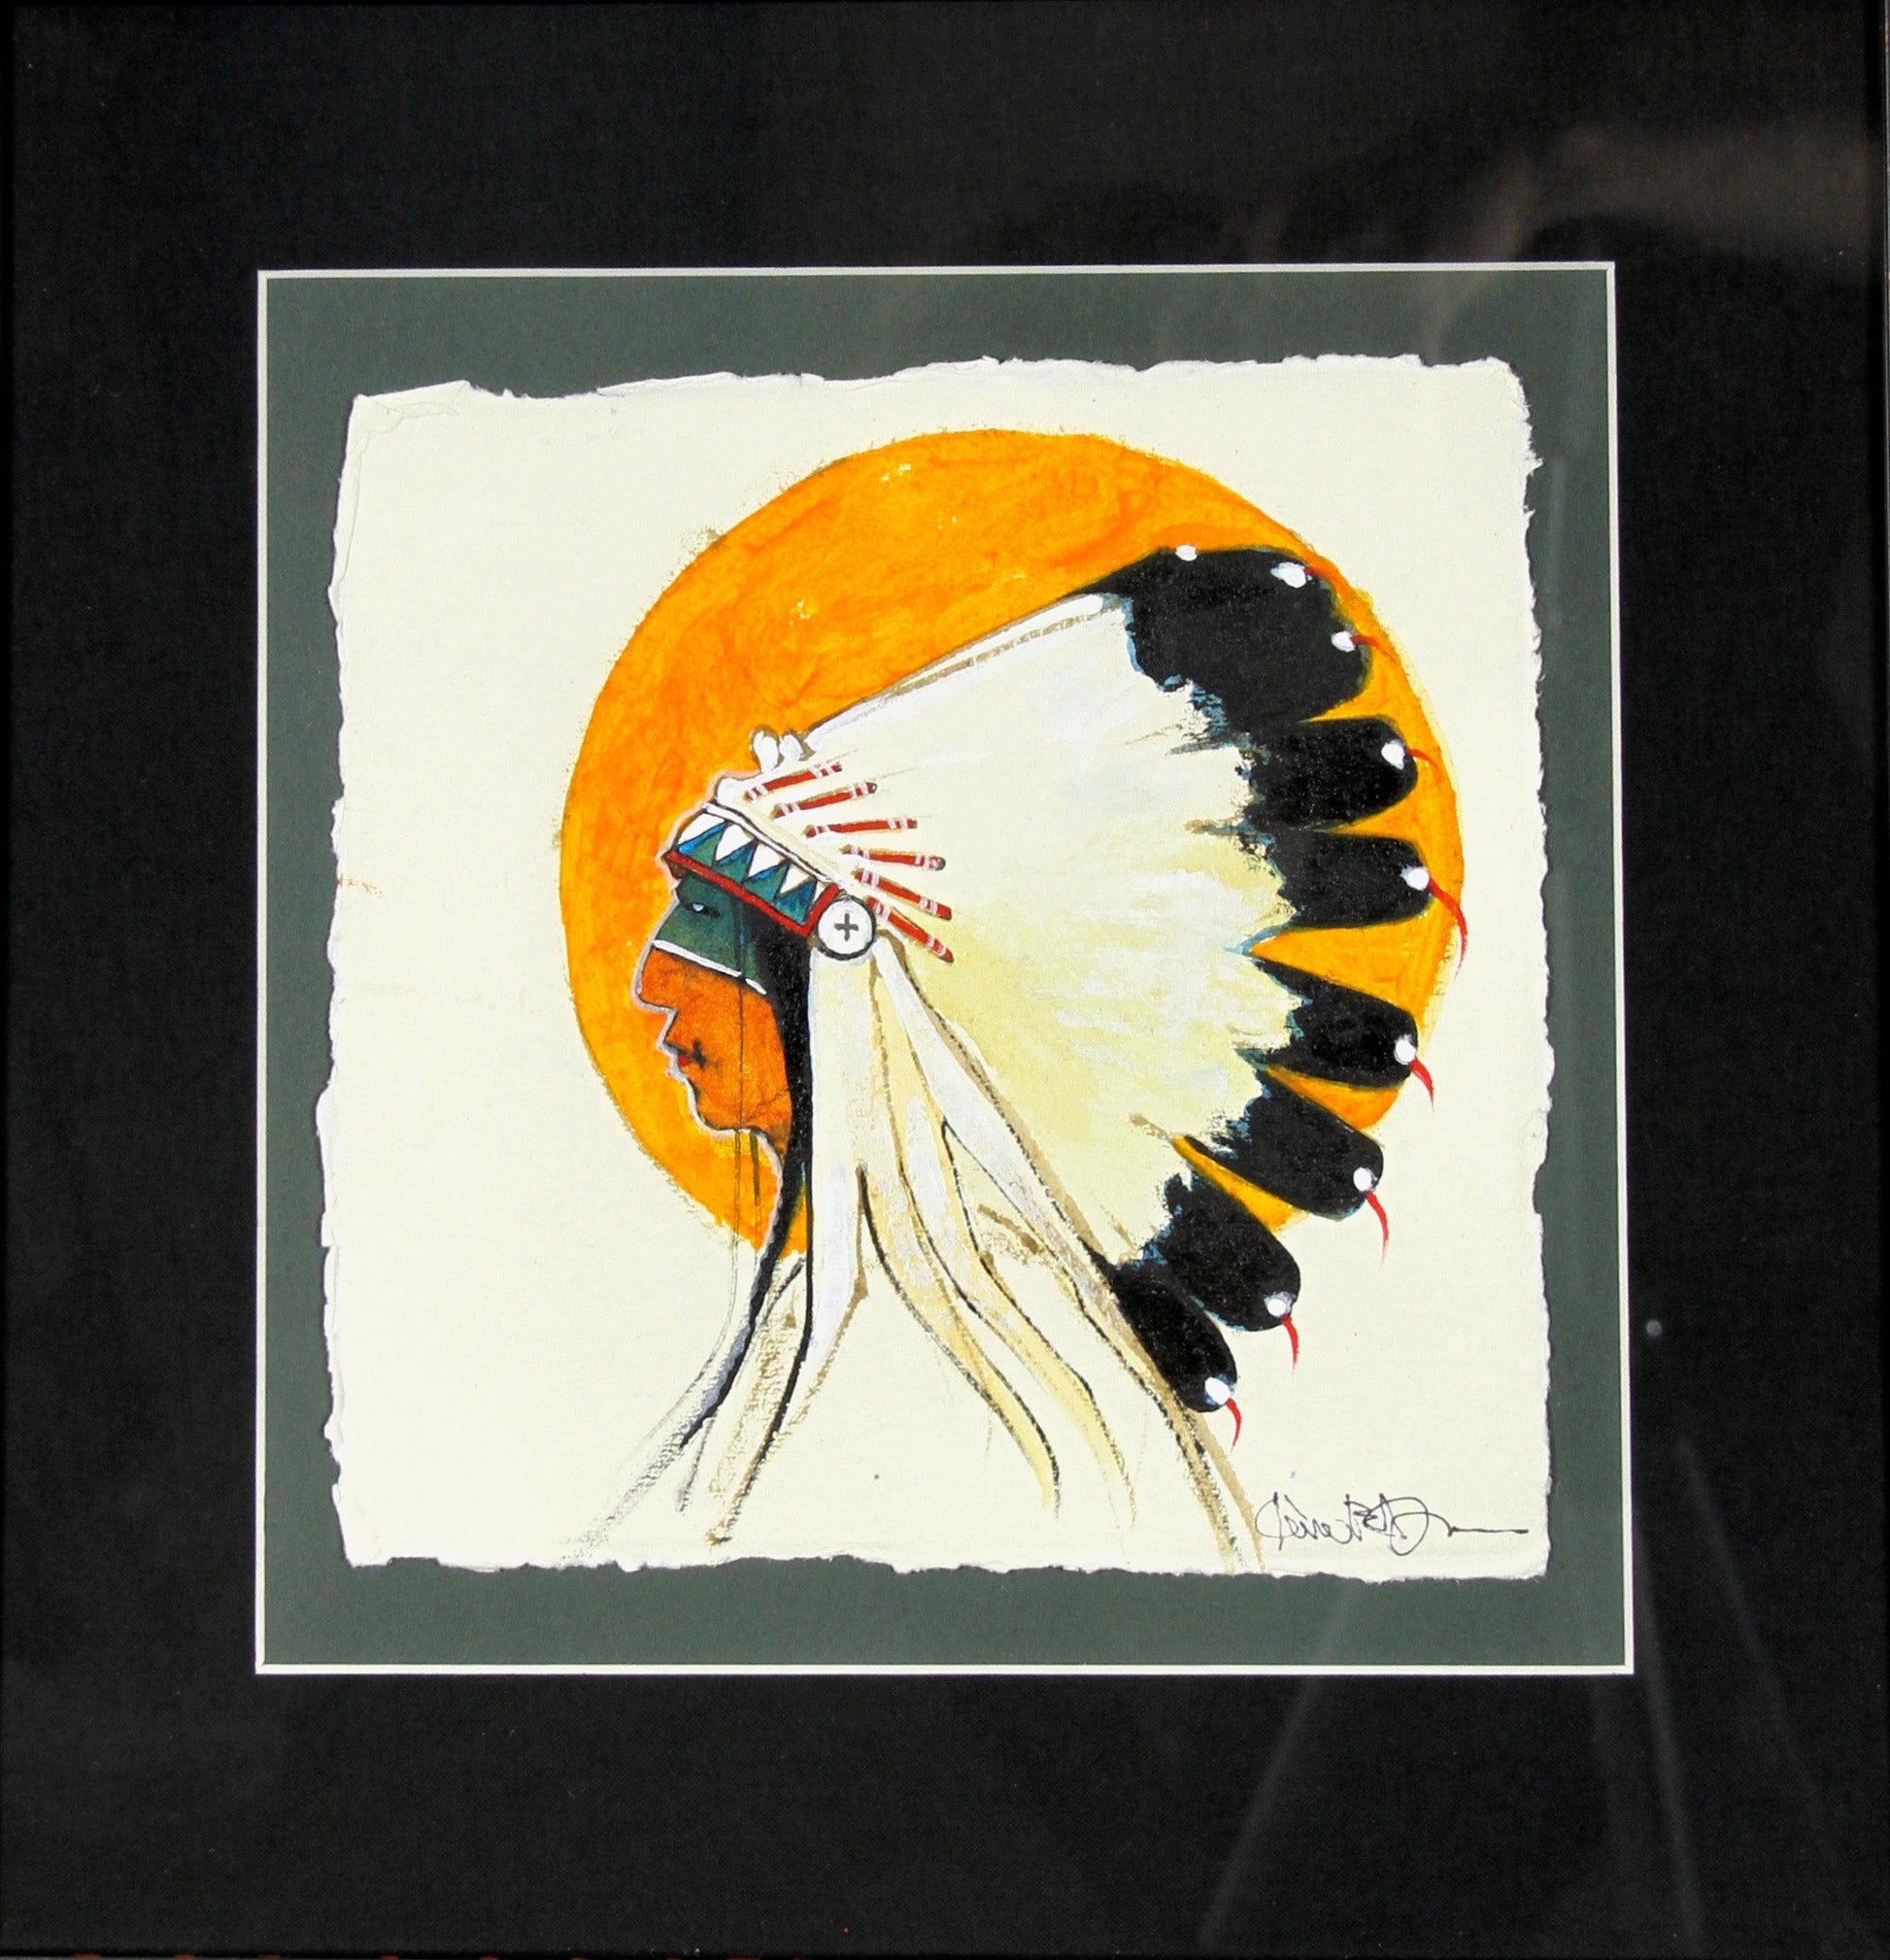 Indian with Feather War Bonnet-Mixed-Media Original-Kevin Red Star-Sorrel Sky Gallery